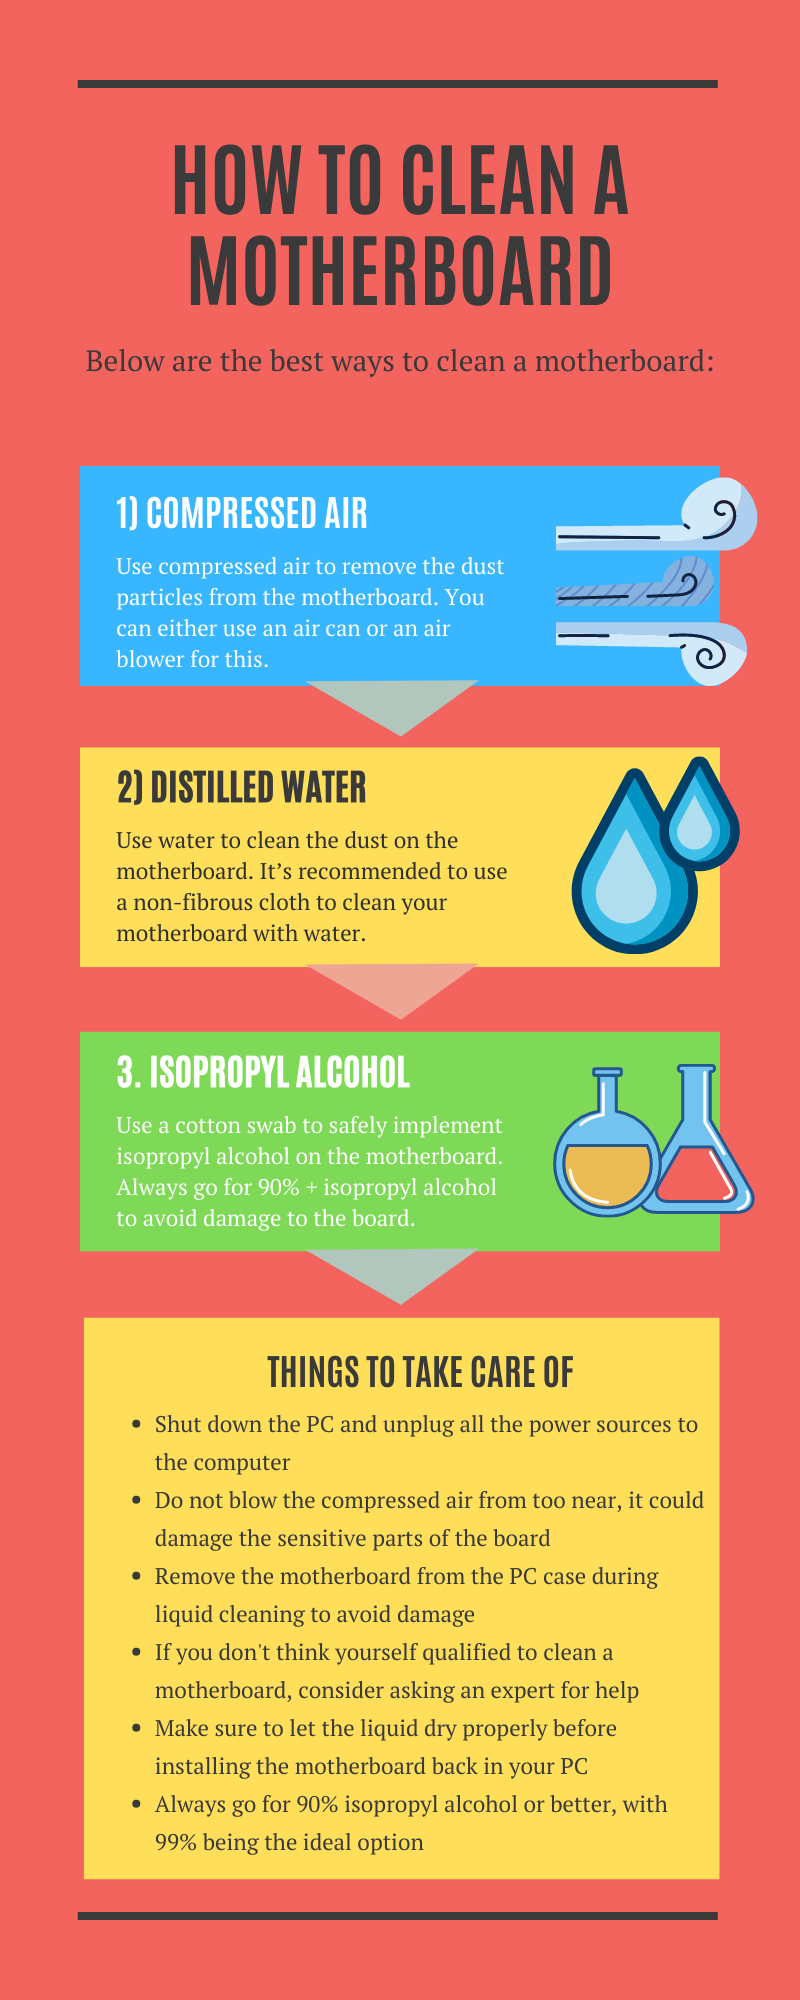 How to Clean a Motherboard Infographic